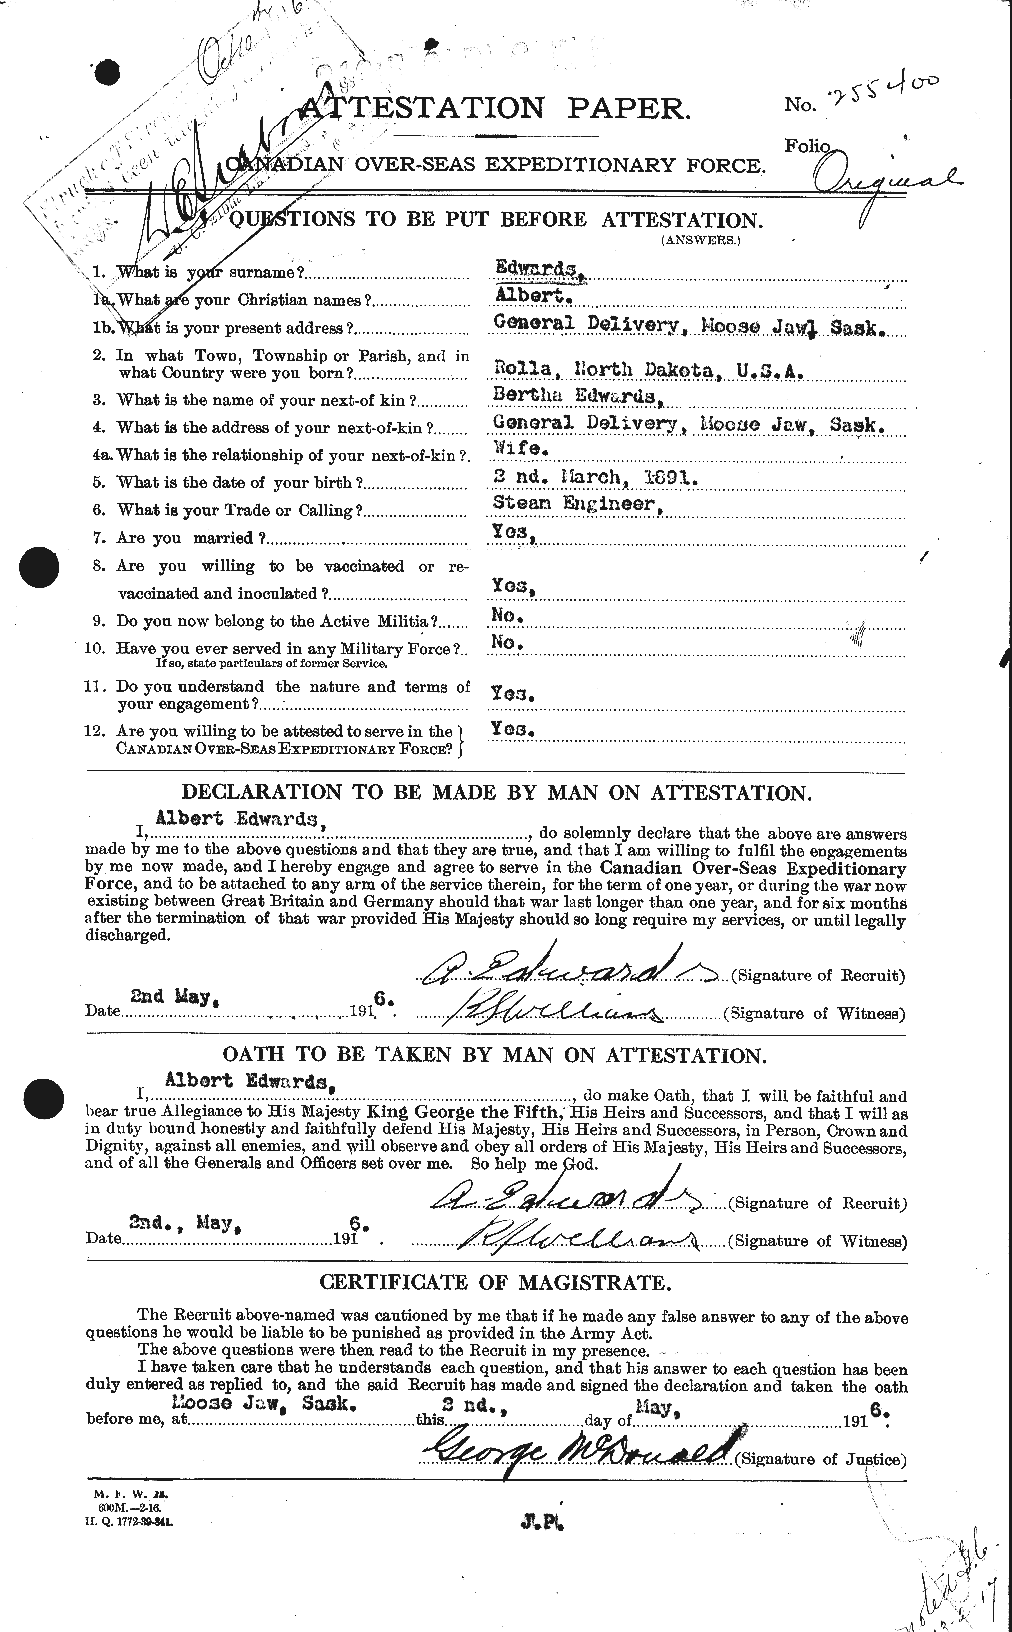 Personnel Records of the First World War - CEF 313084a